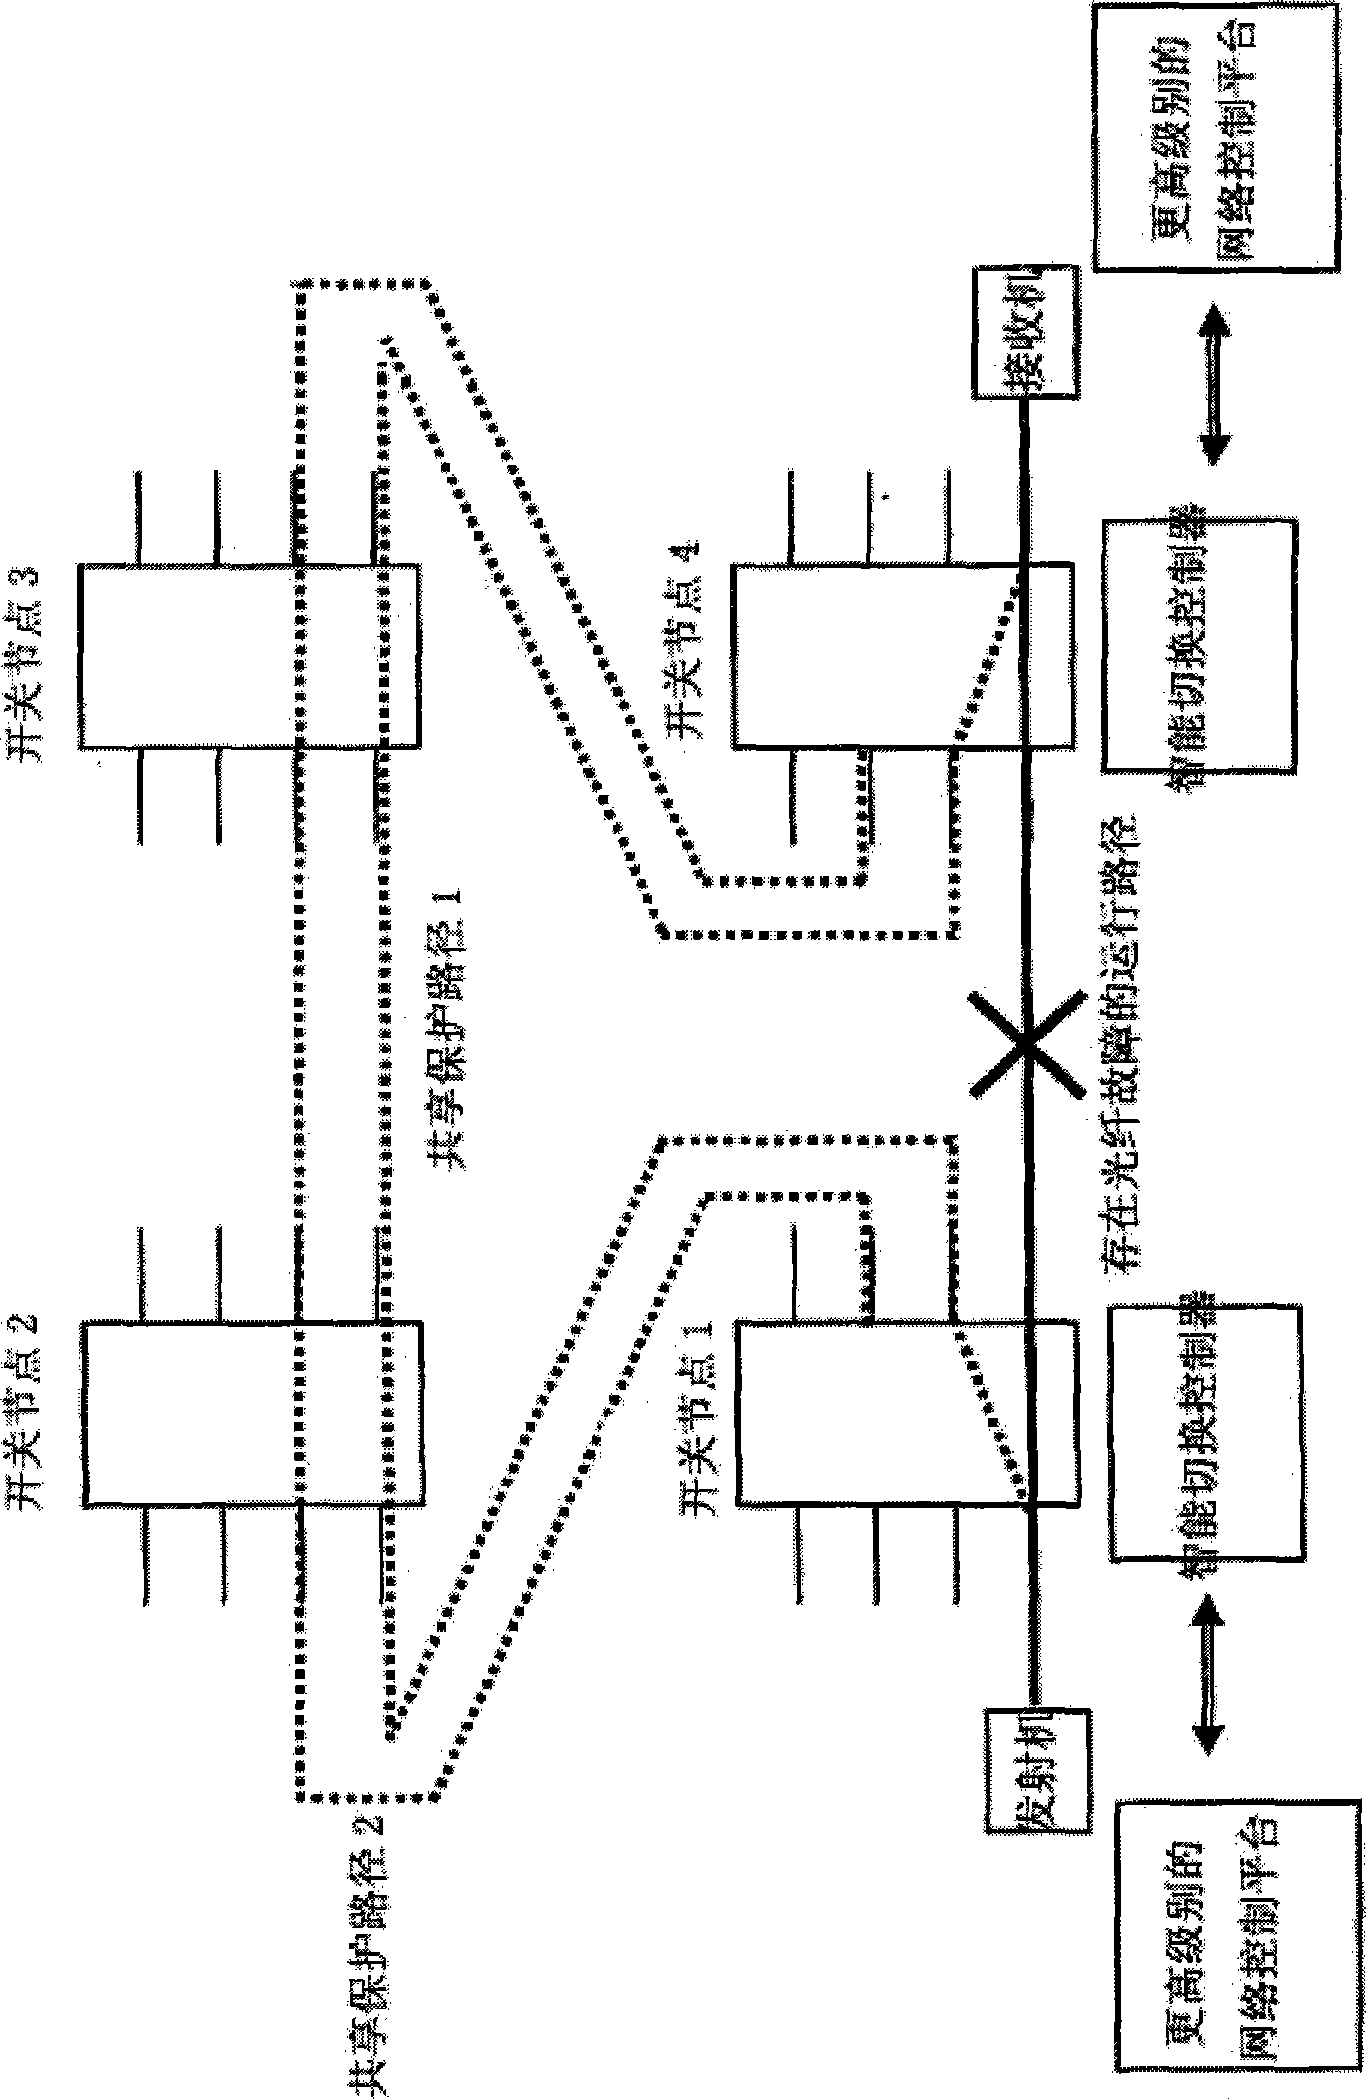 Network protection switching mechanisms and methods of network protection